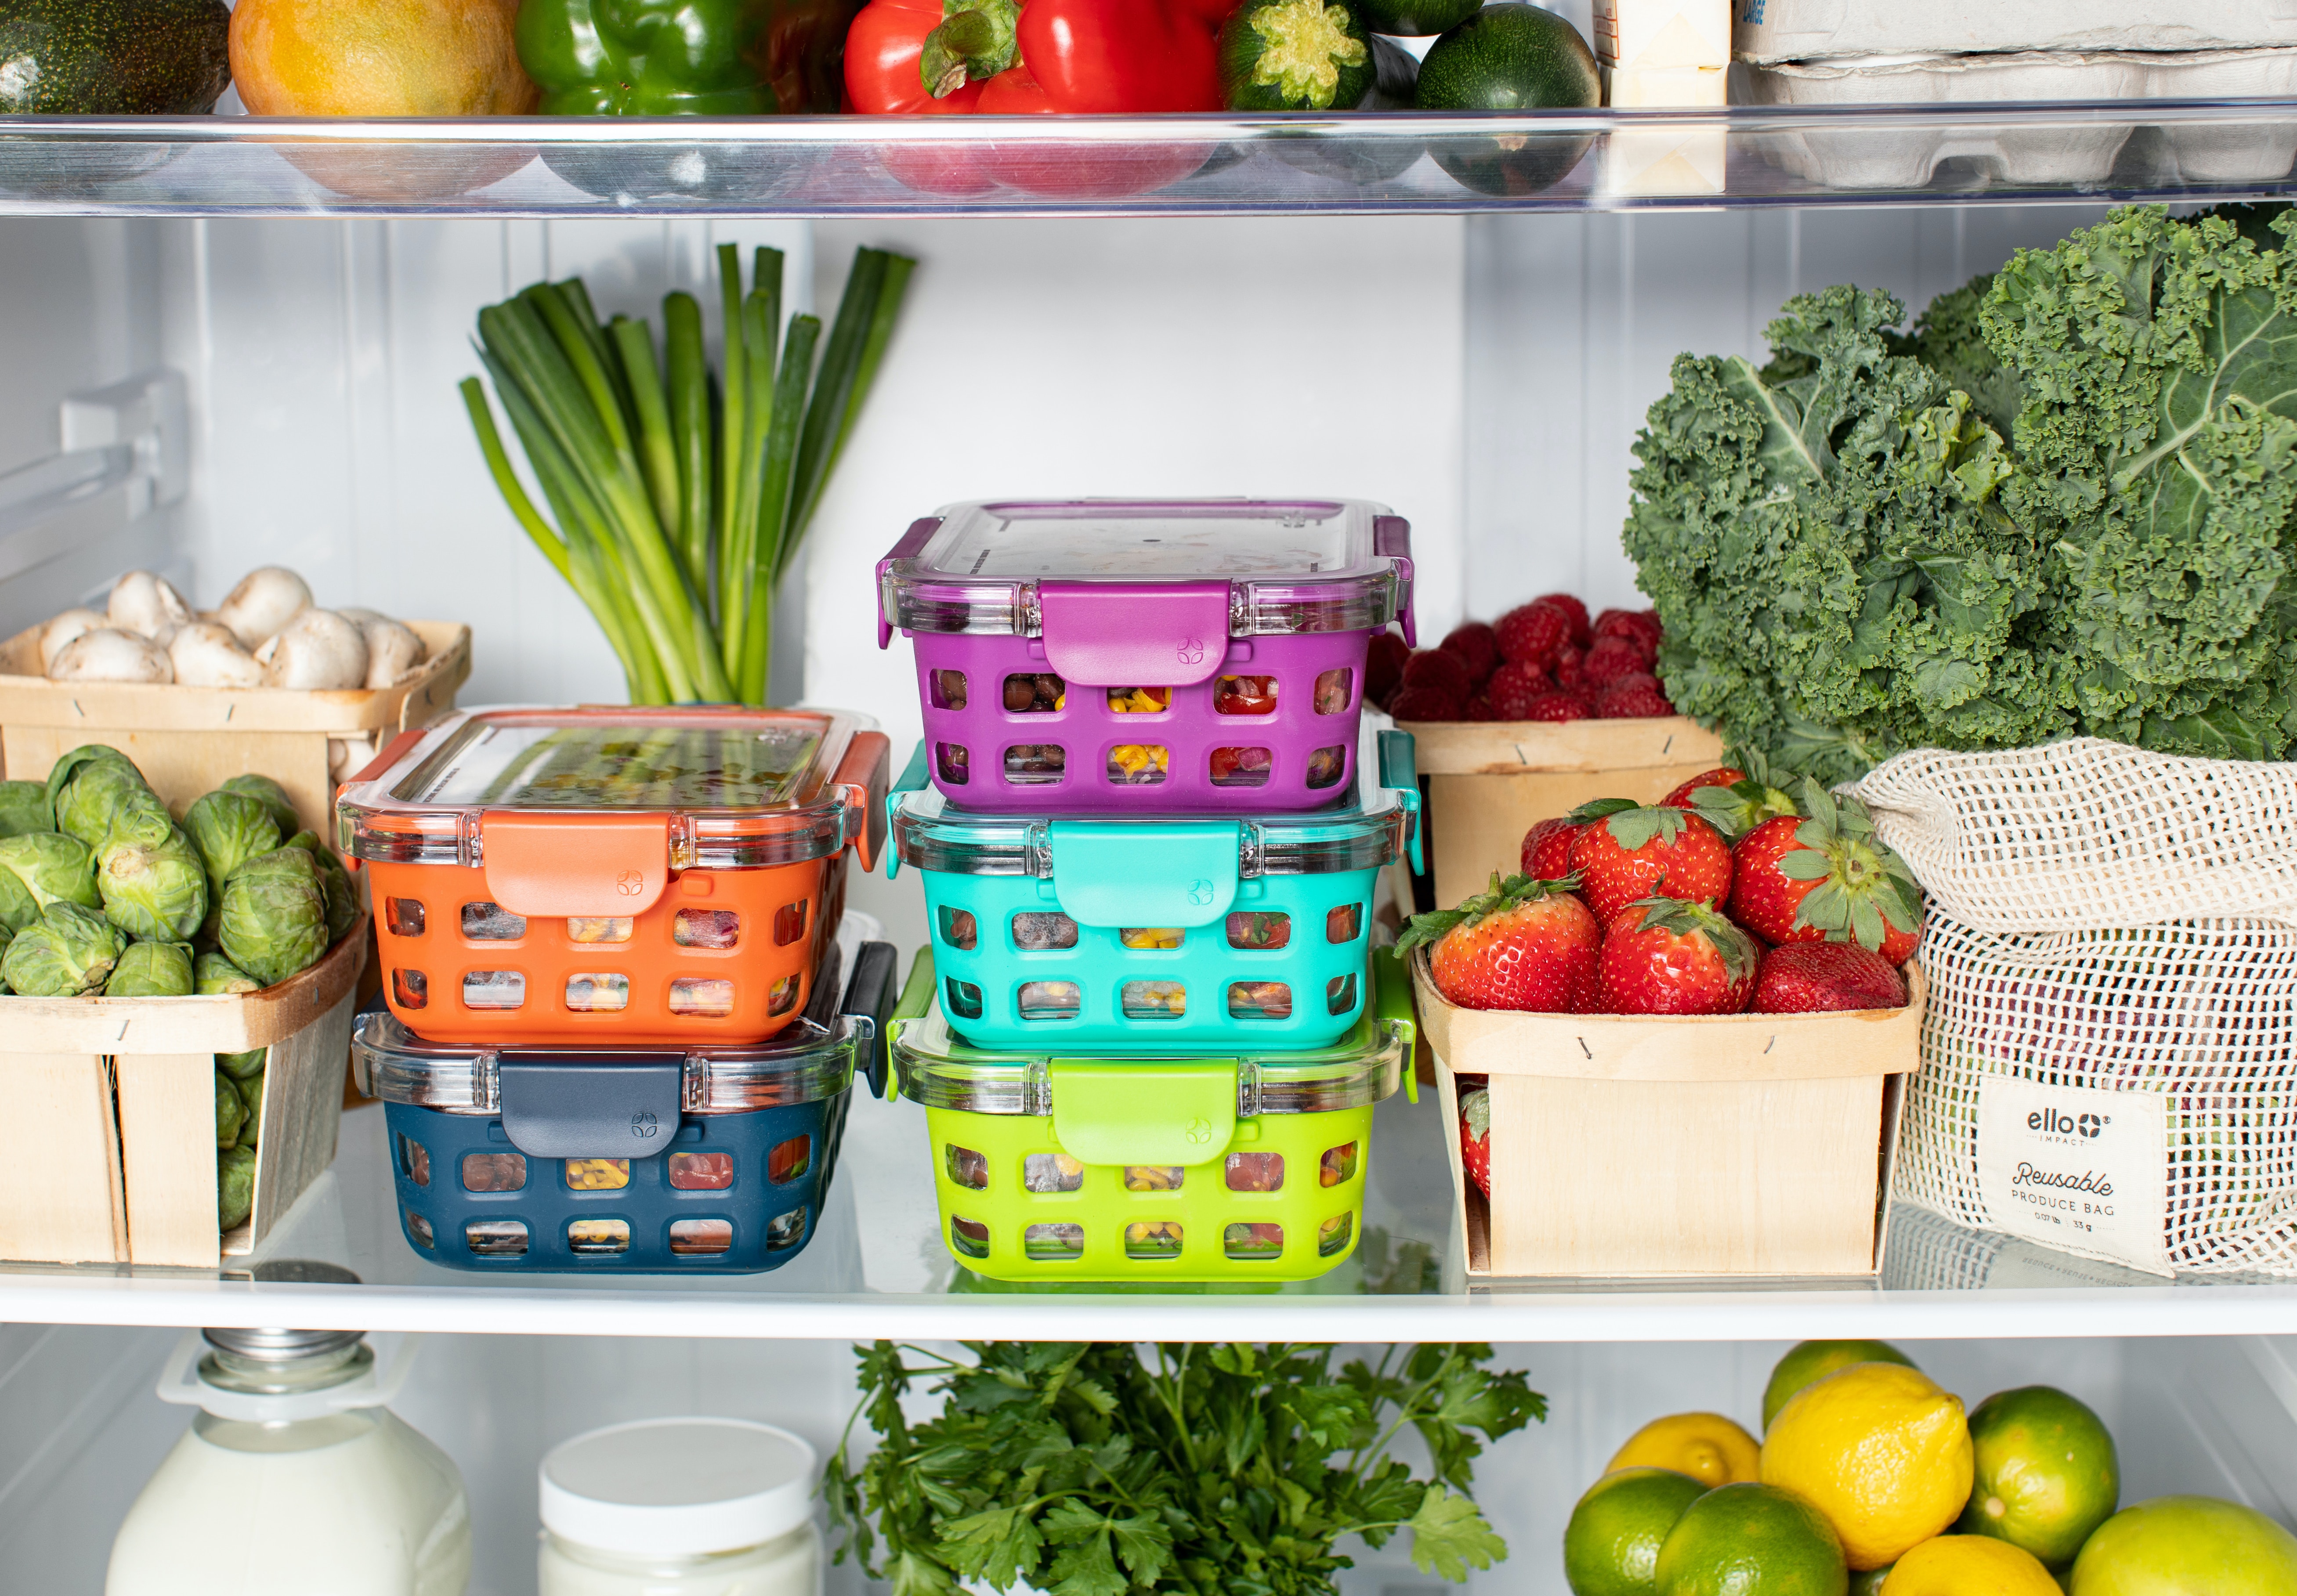 fruit and vegetable refrigerator storage. Glass containers with rubber grip